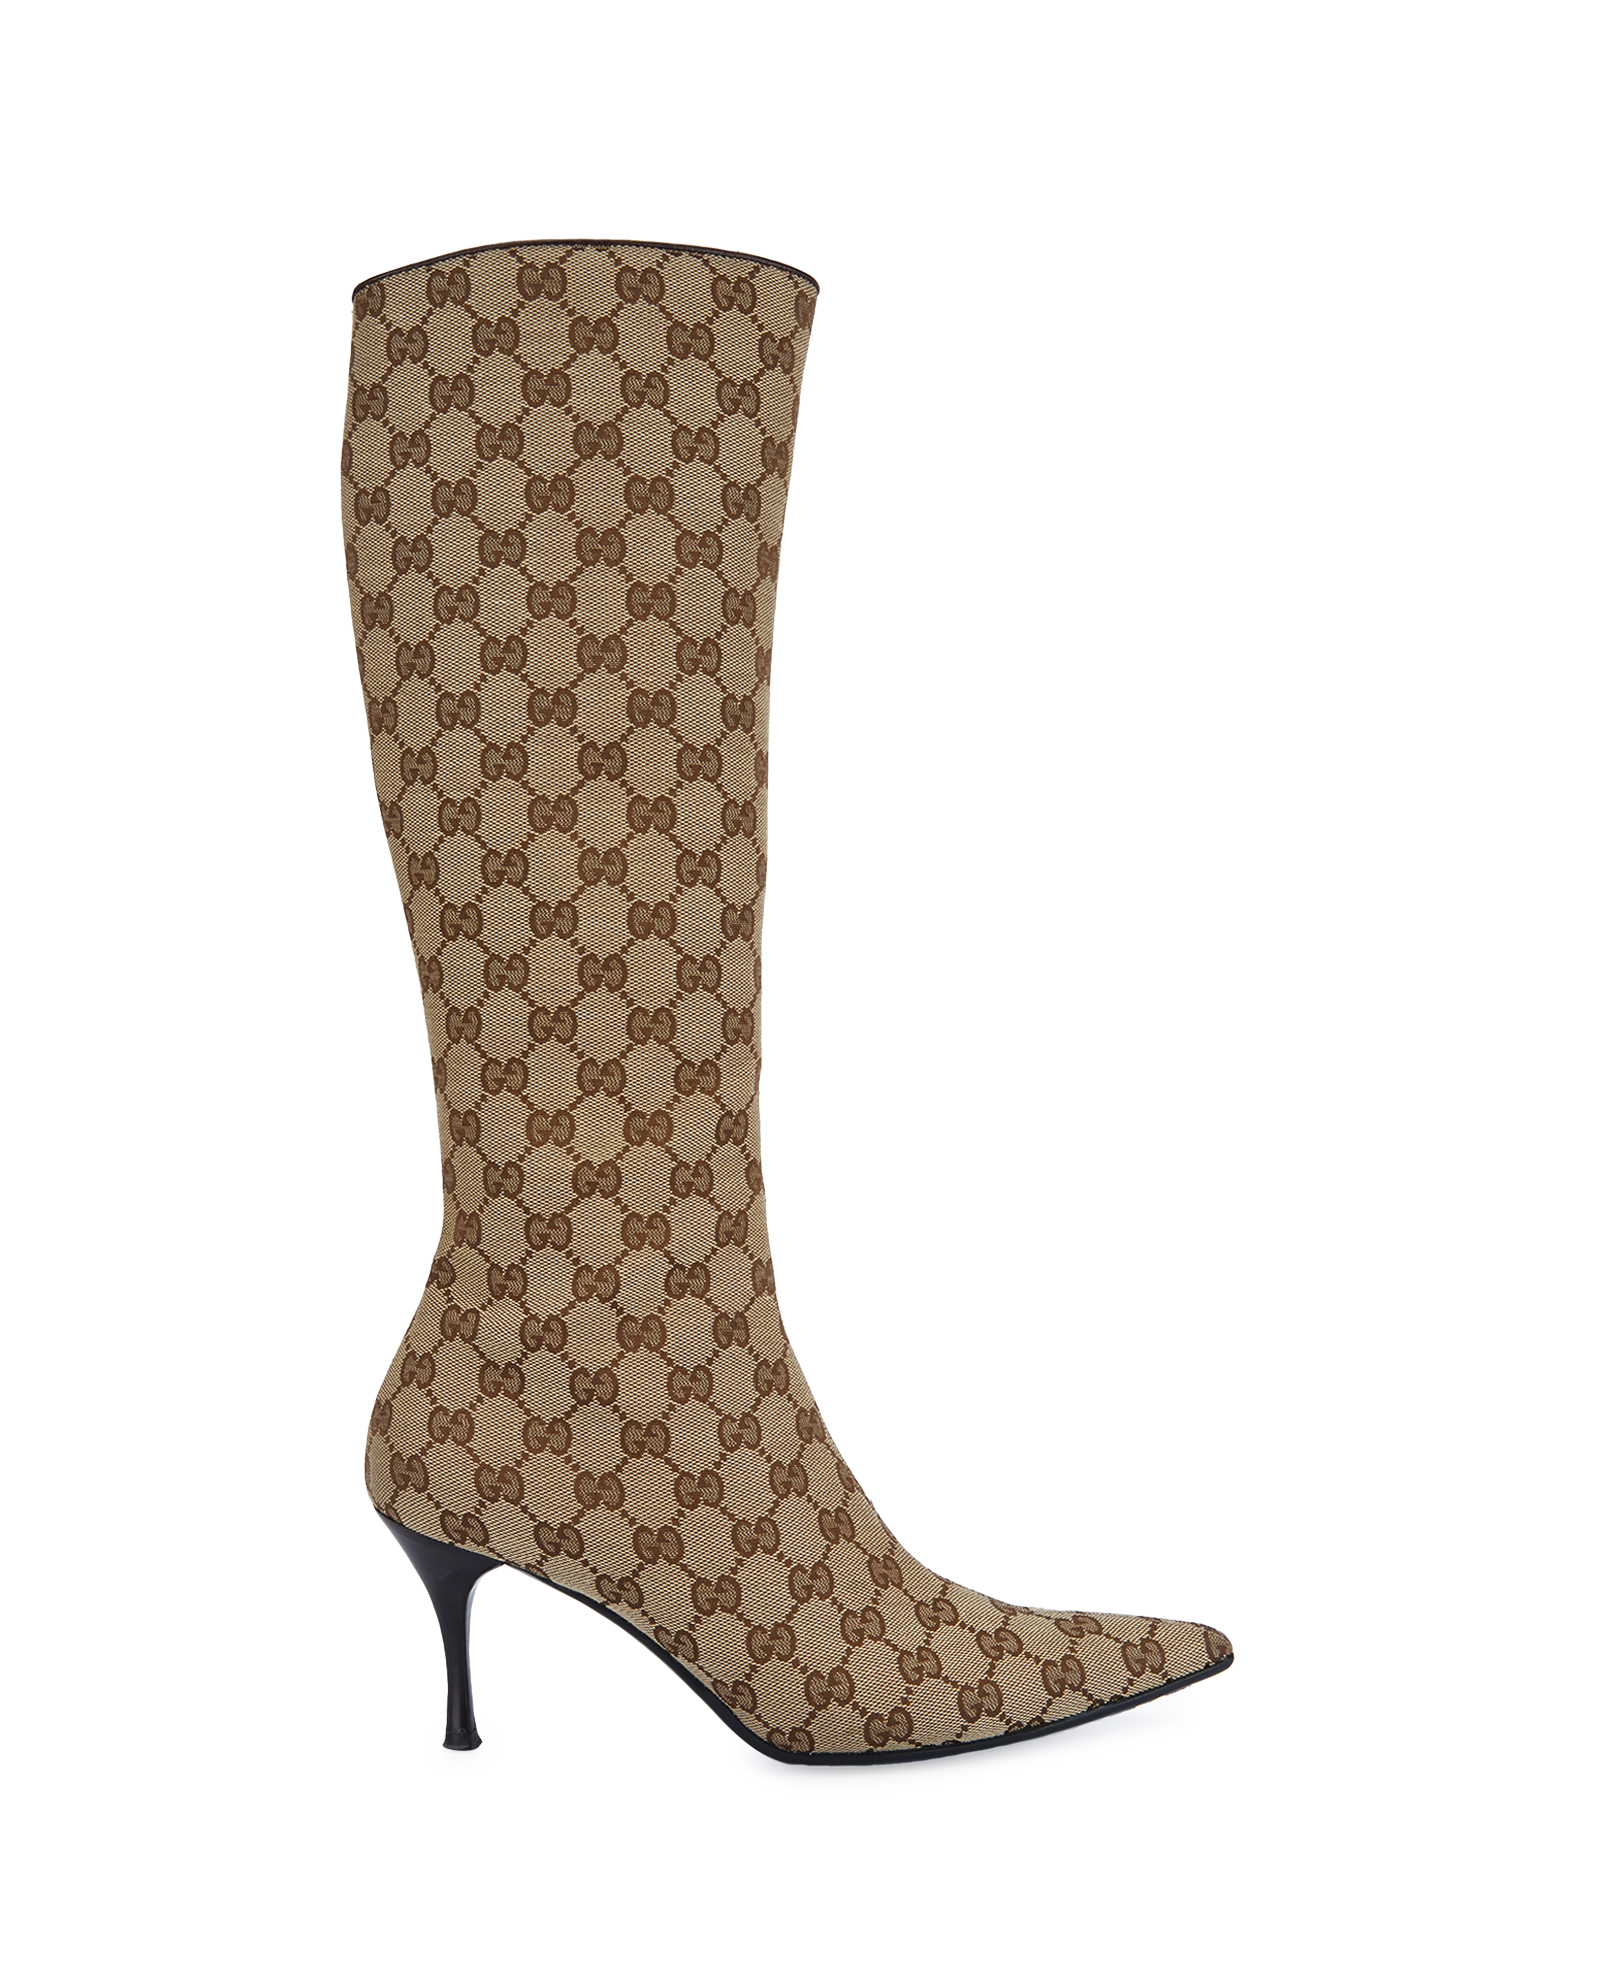 Gucci Monogram Knee High Boots, Boots Exchange | Buy Sell